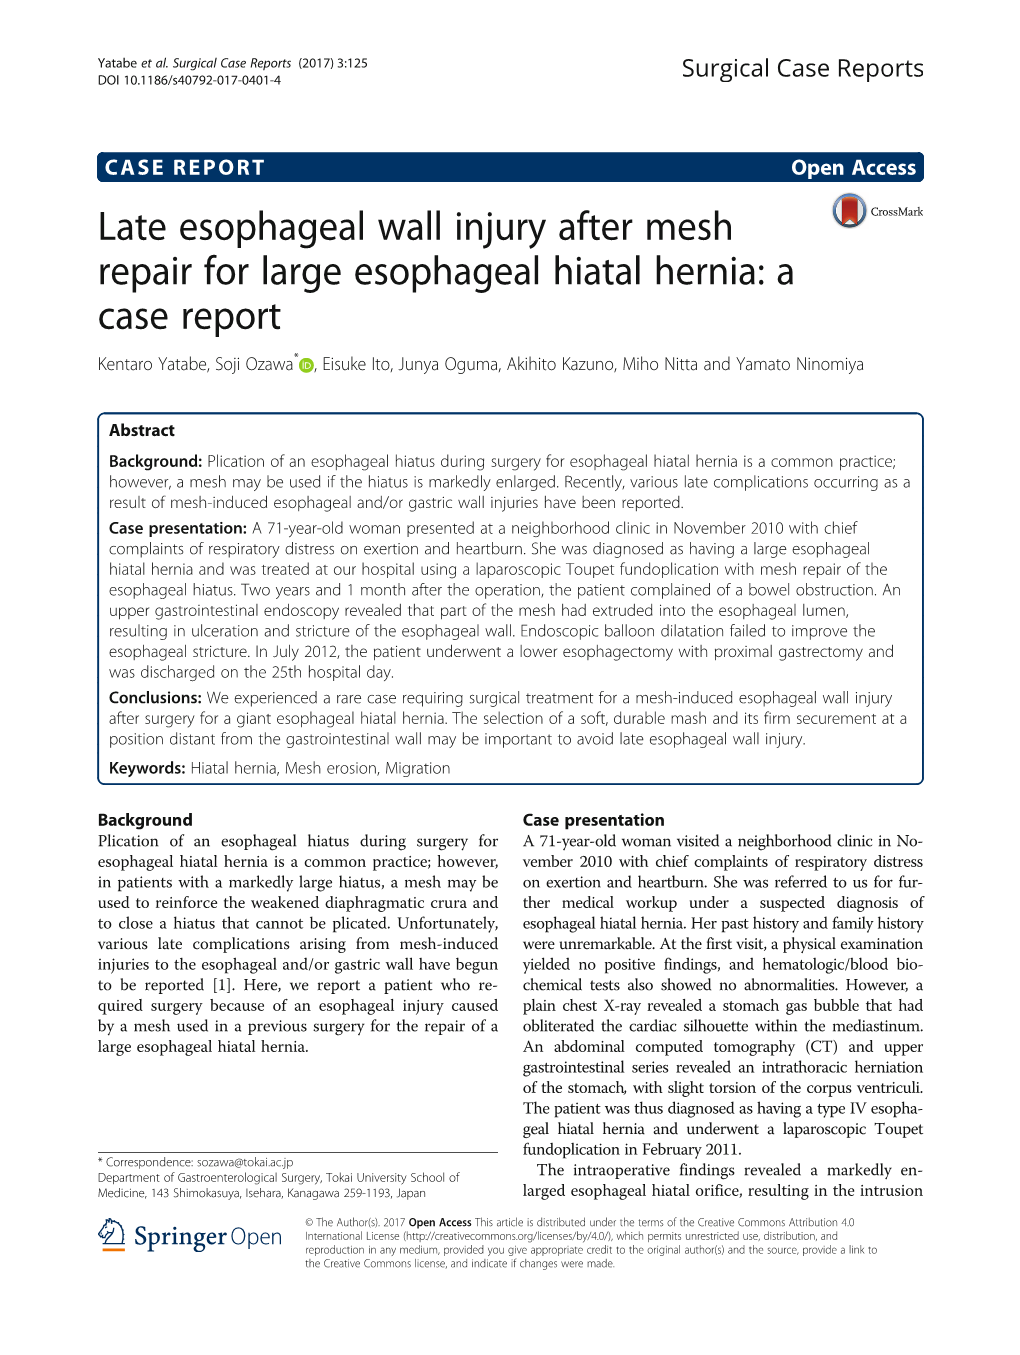 Late Esophageal Wall Injury After Mesh Repair for Large Esophageal